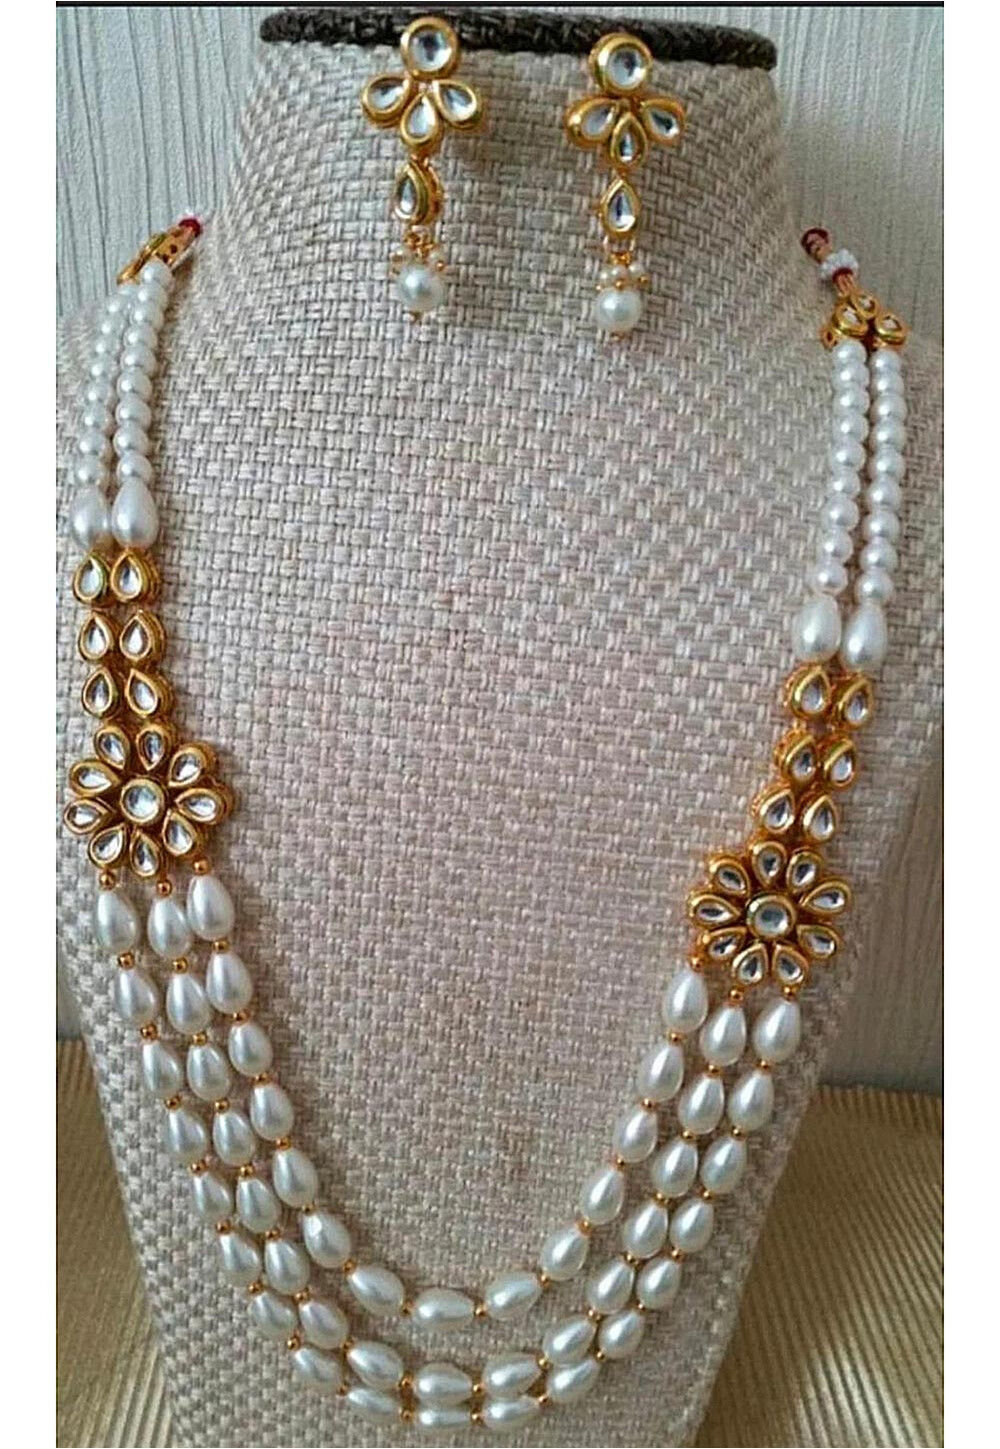 Buy White Pearl Beaded Layered Necklace Online at Jaypore.com